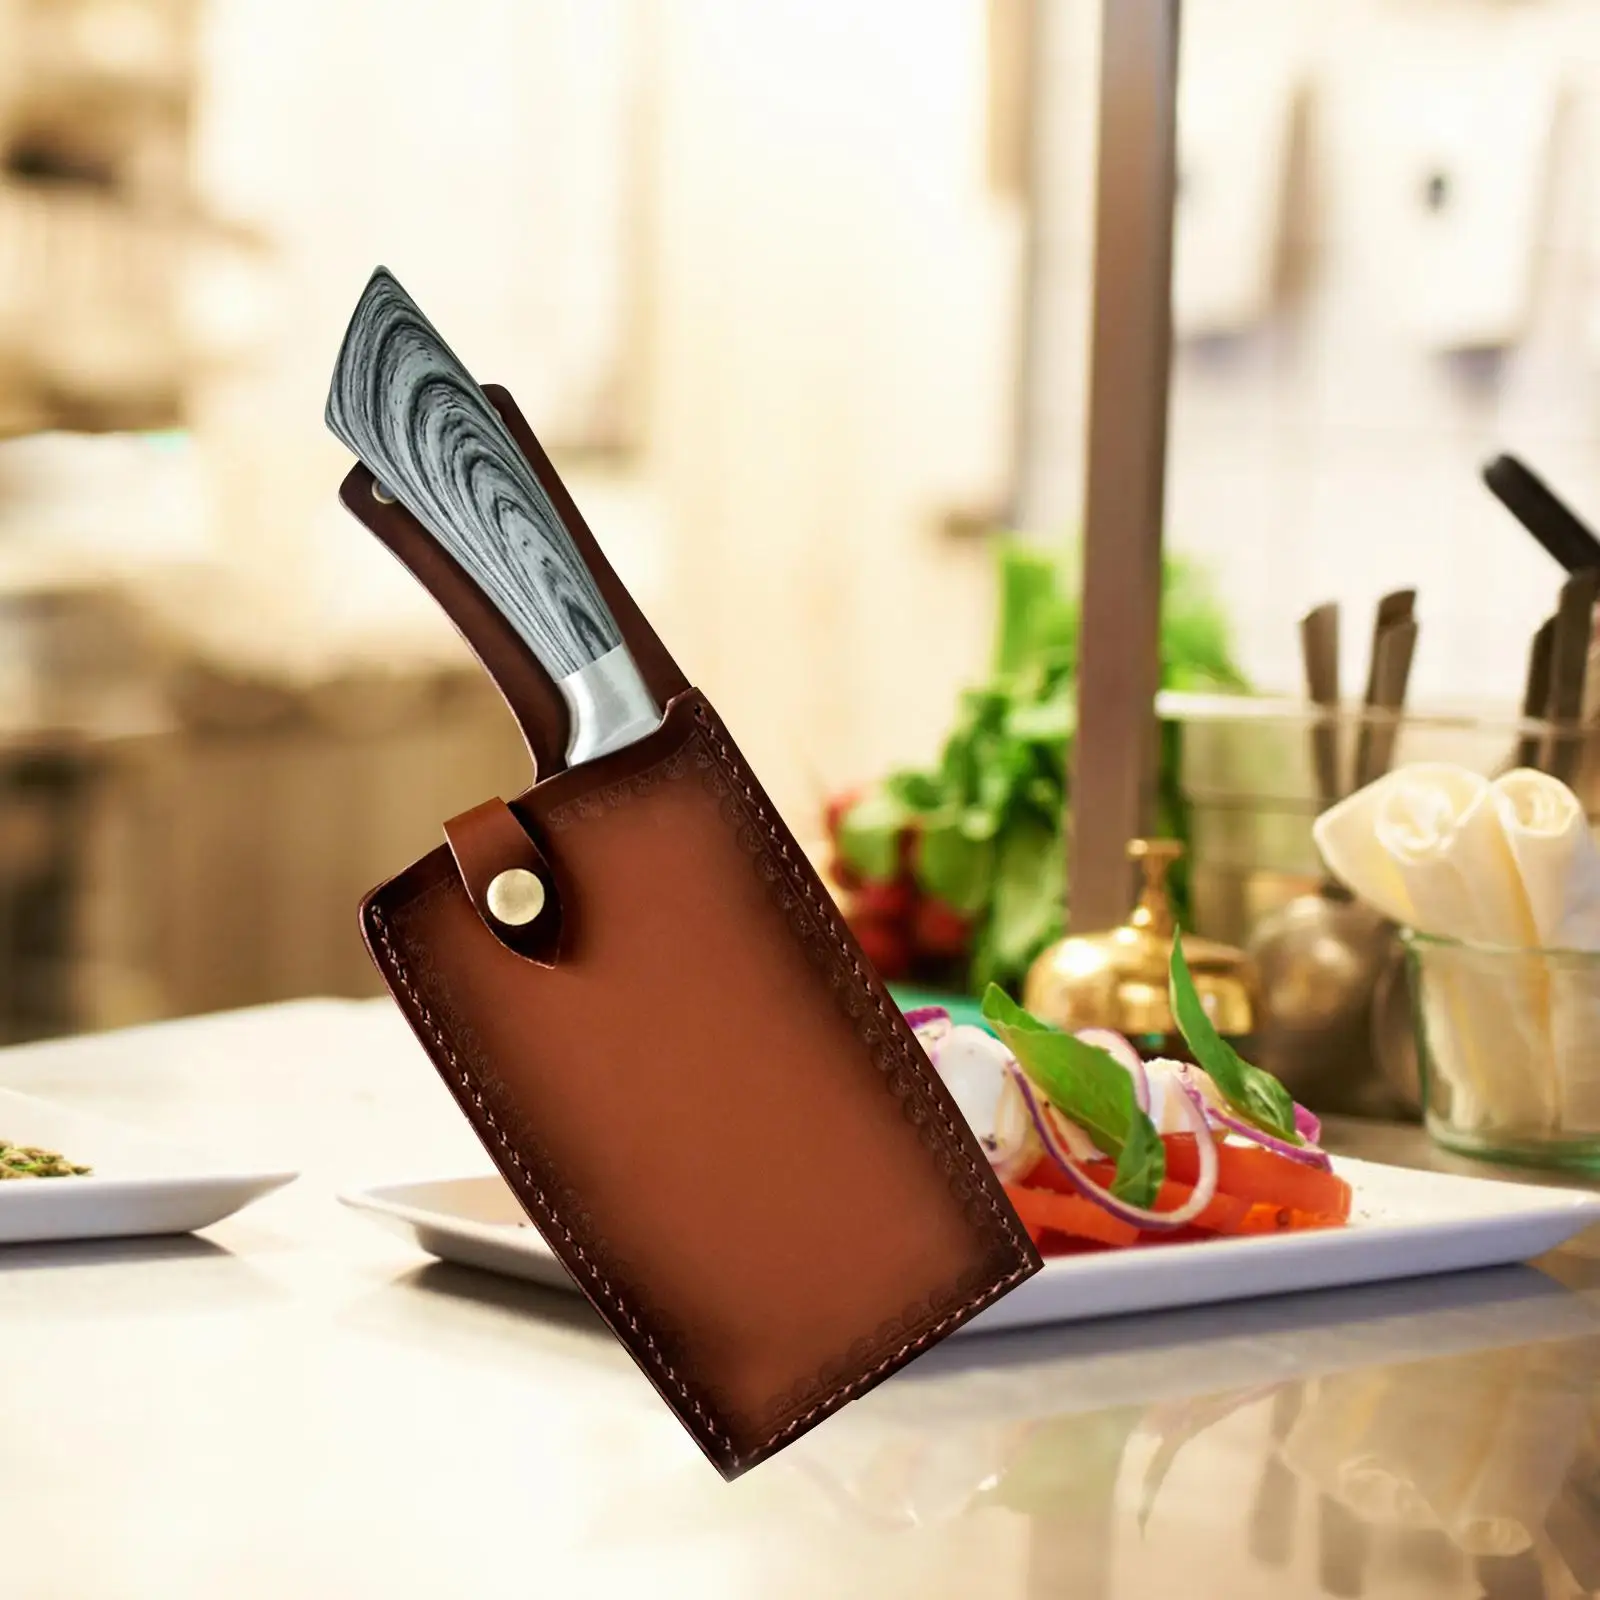 Knife Sheath Protector Portable Kitchen Gadget PU Leather Durable Universal Chef Knife Protection Cutter Protective Cover